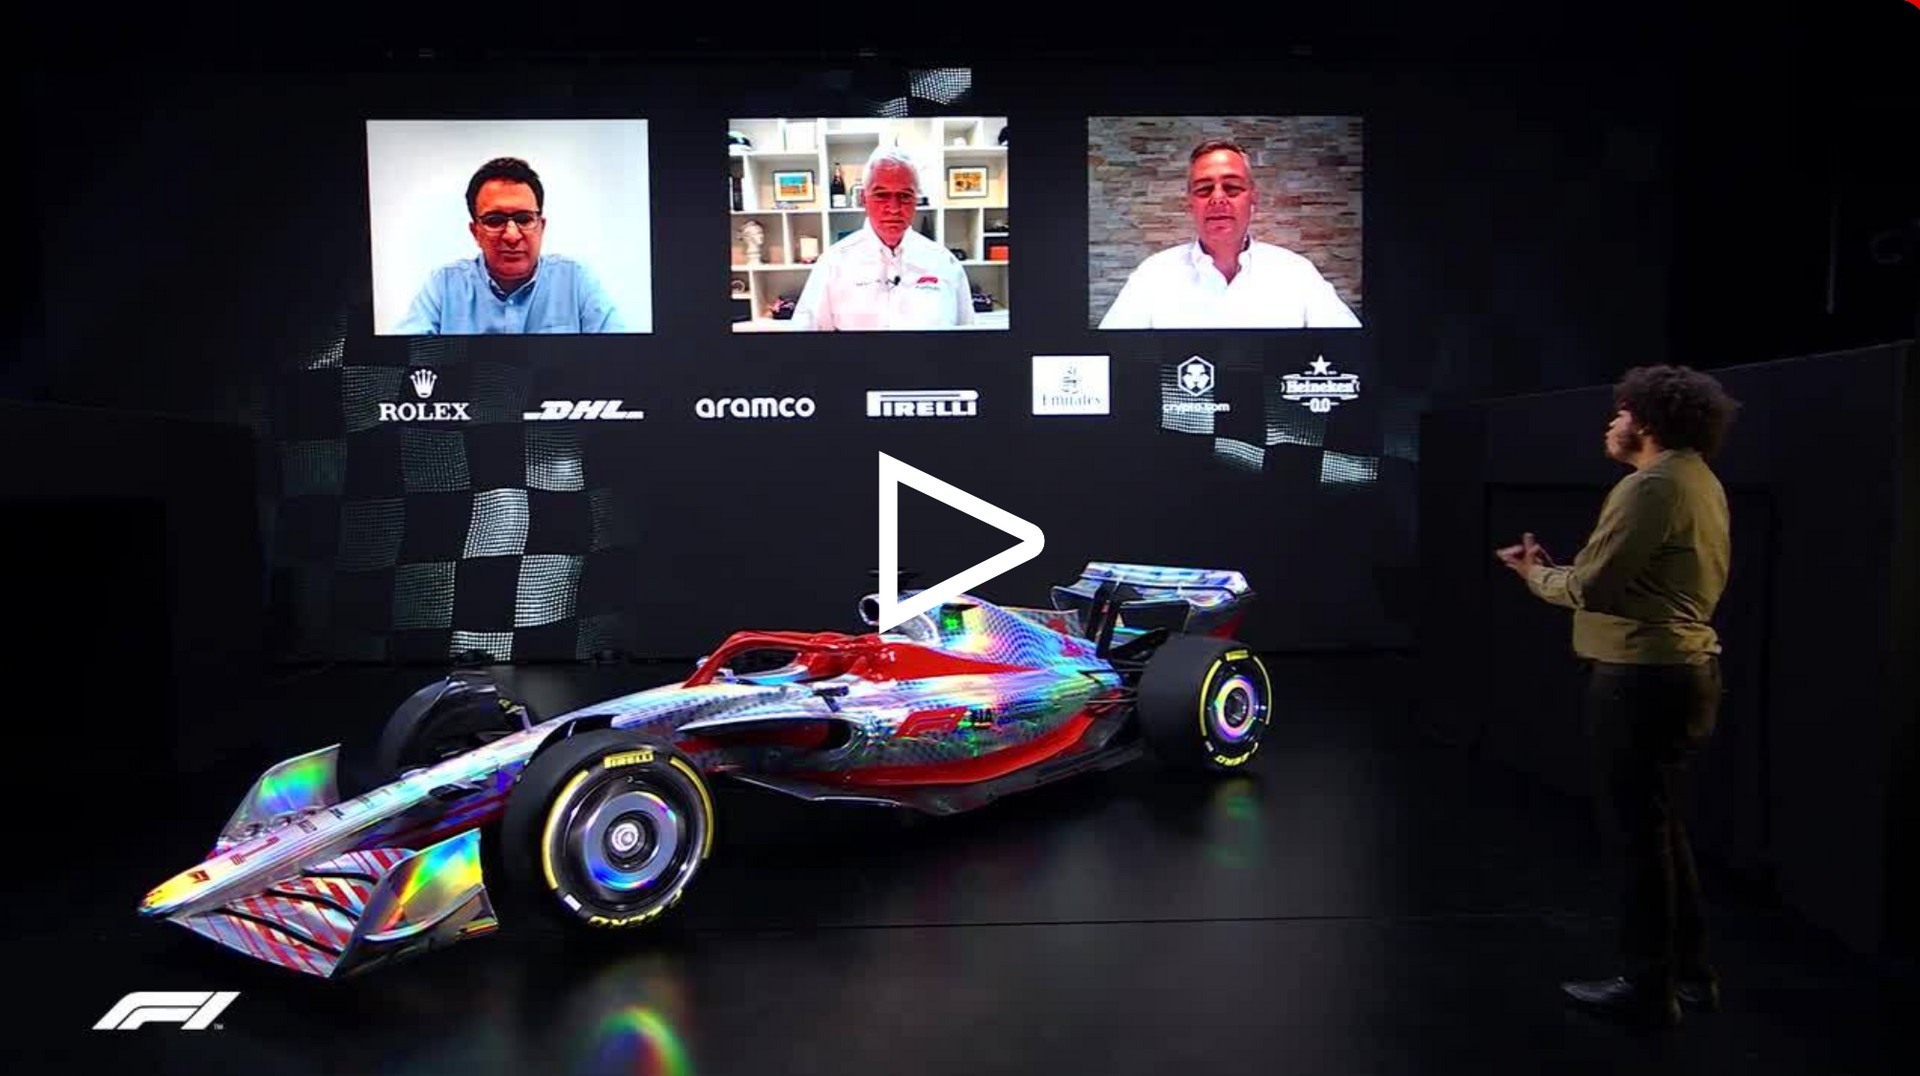 a man is standing next to a colorful race car in front of a large screen .